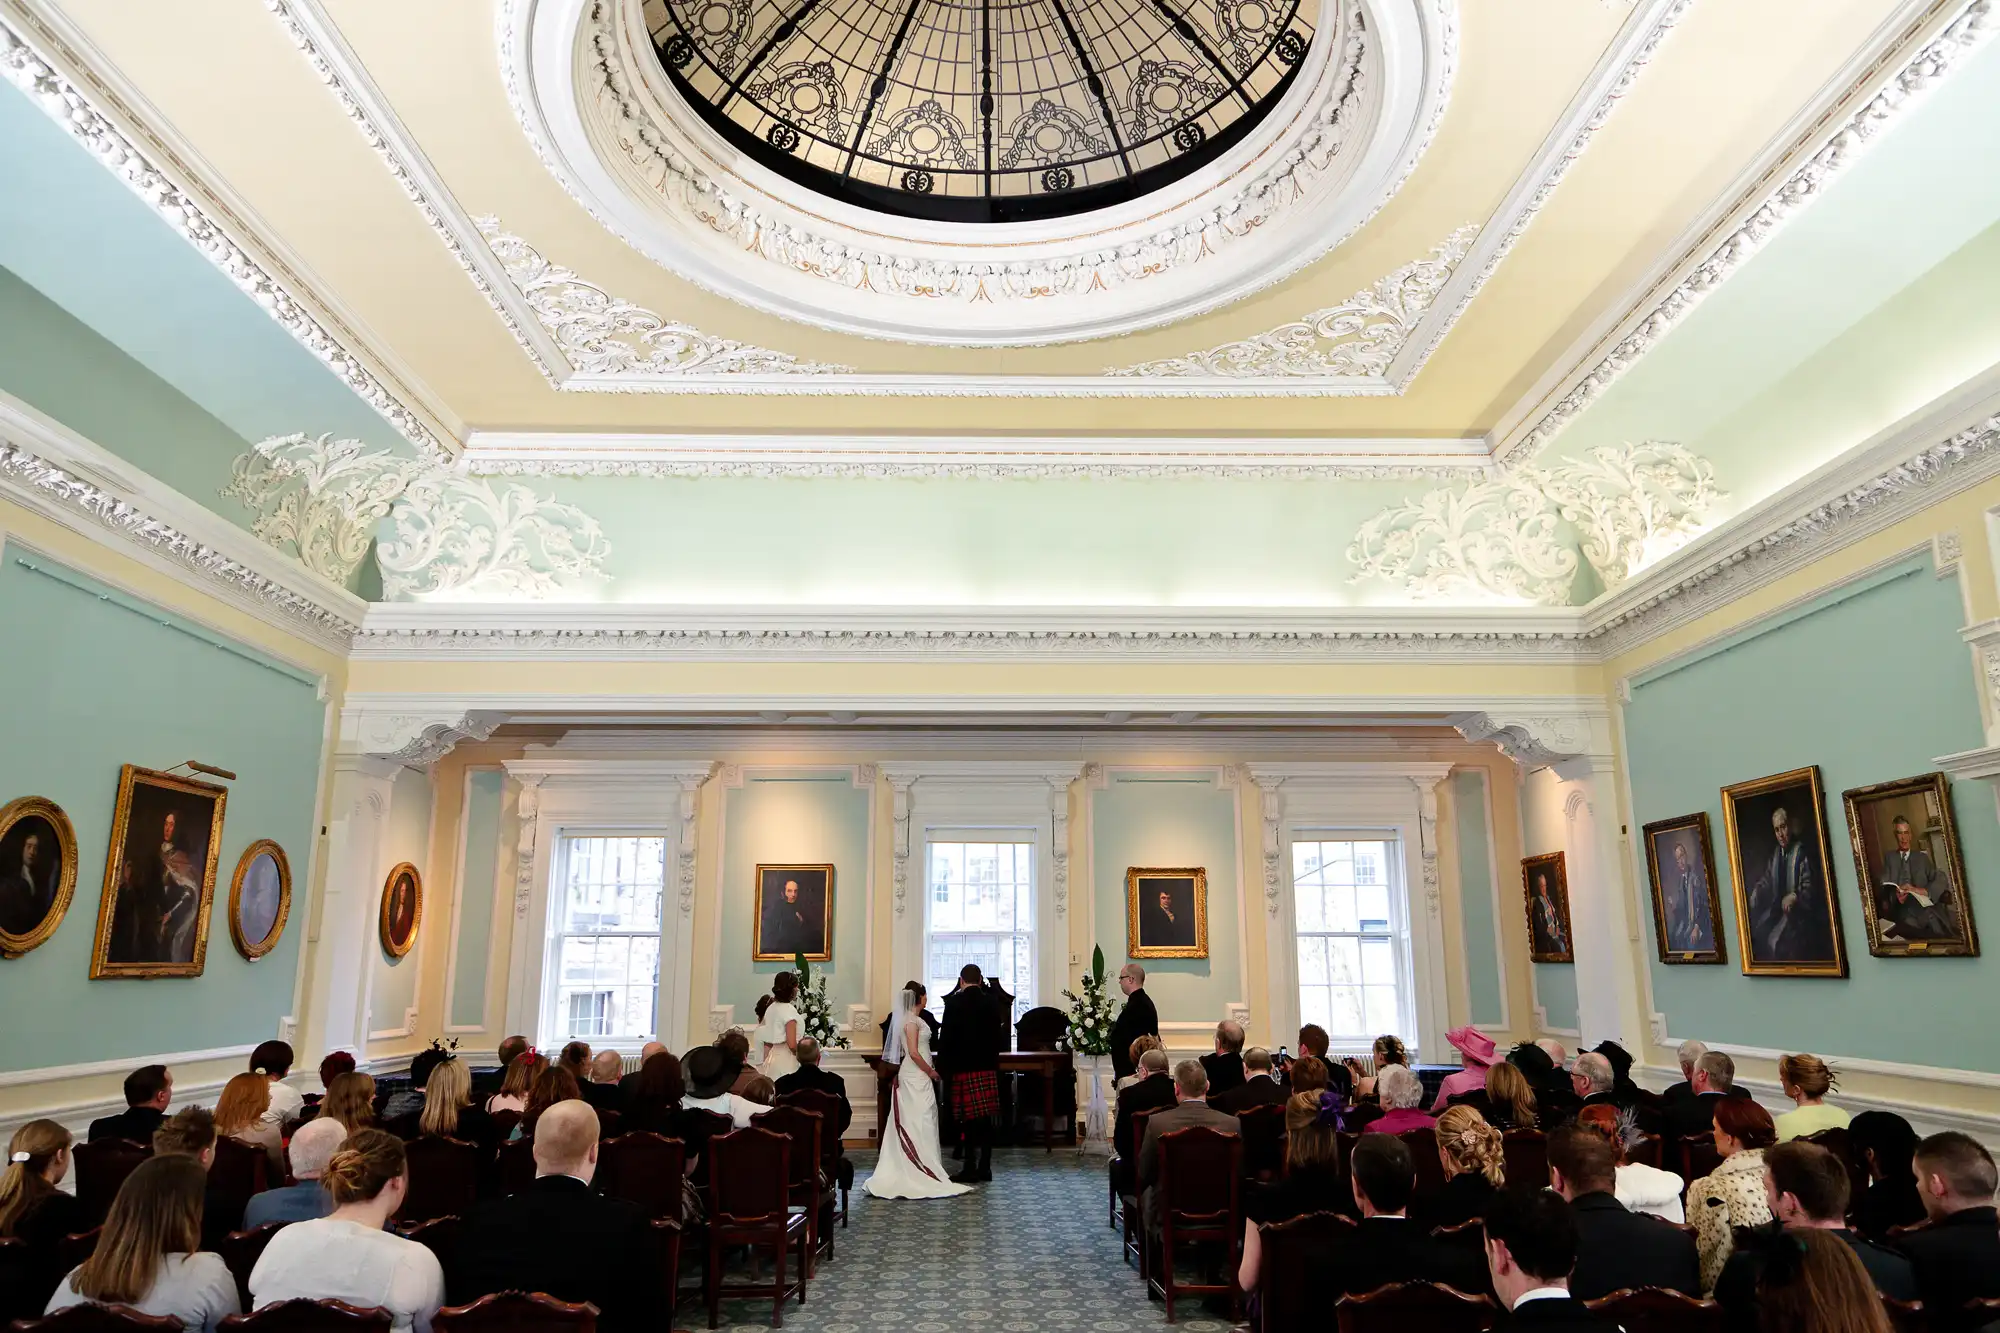 A wedding ceremony in an elegant room with a domed skylight, pastel walls, decorative moldings, and portraits, as guests seated in rows watch a couple at the altar.